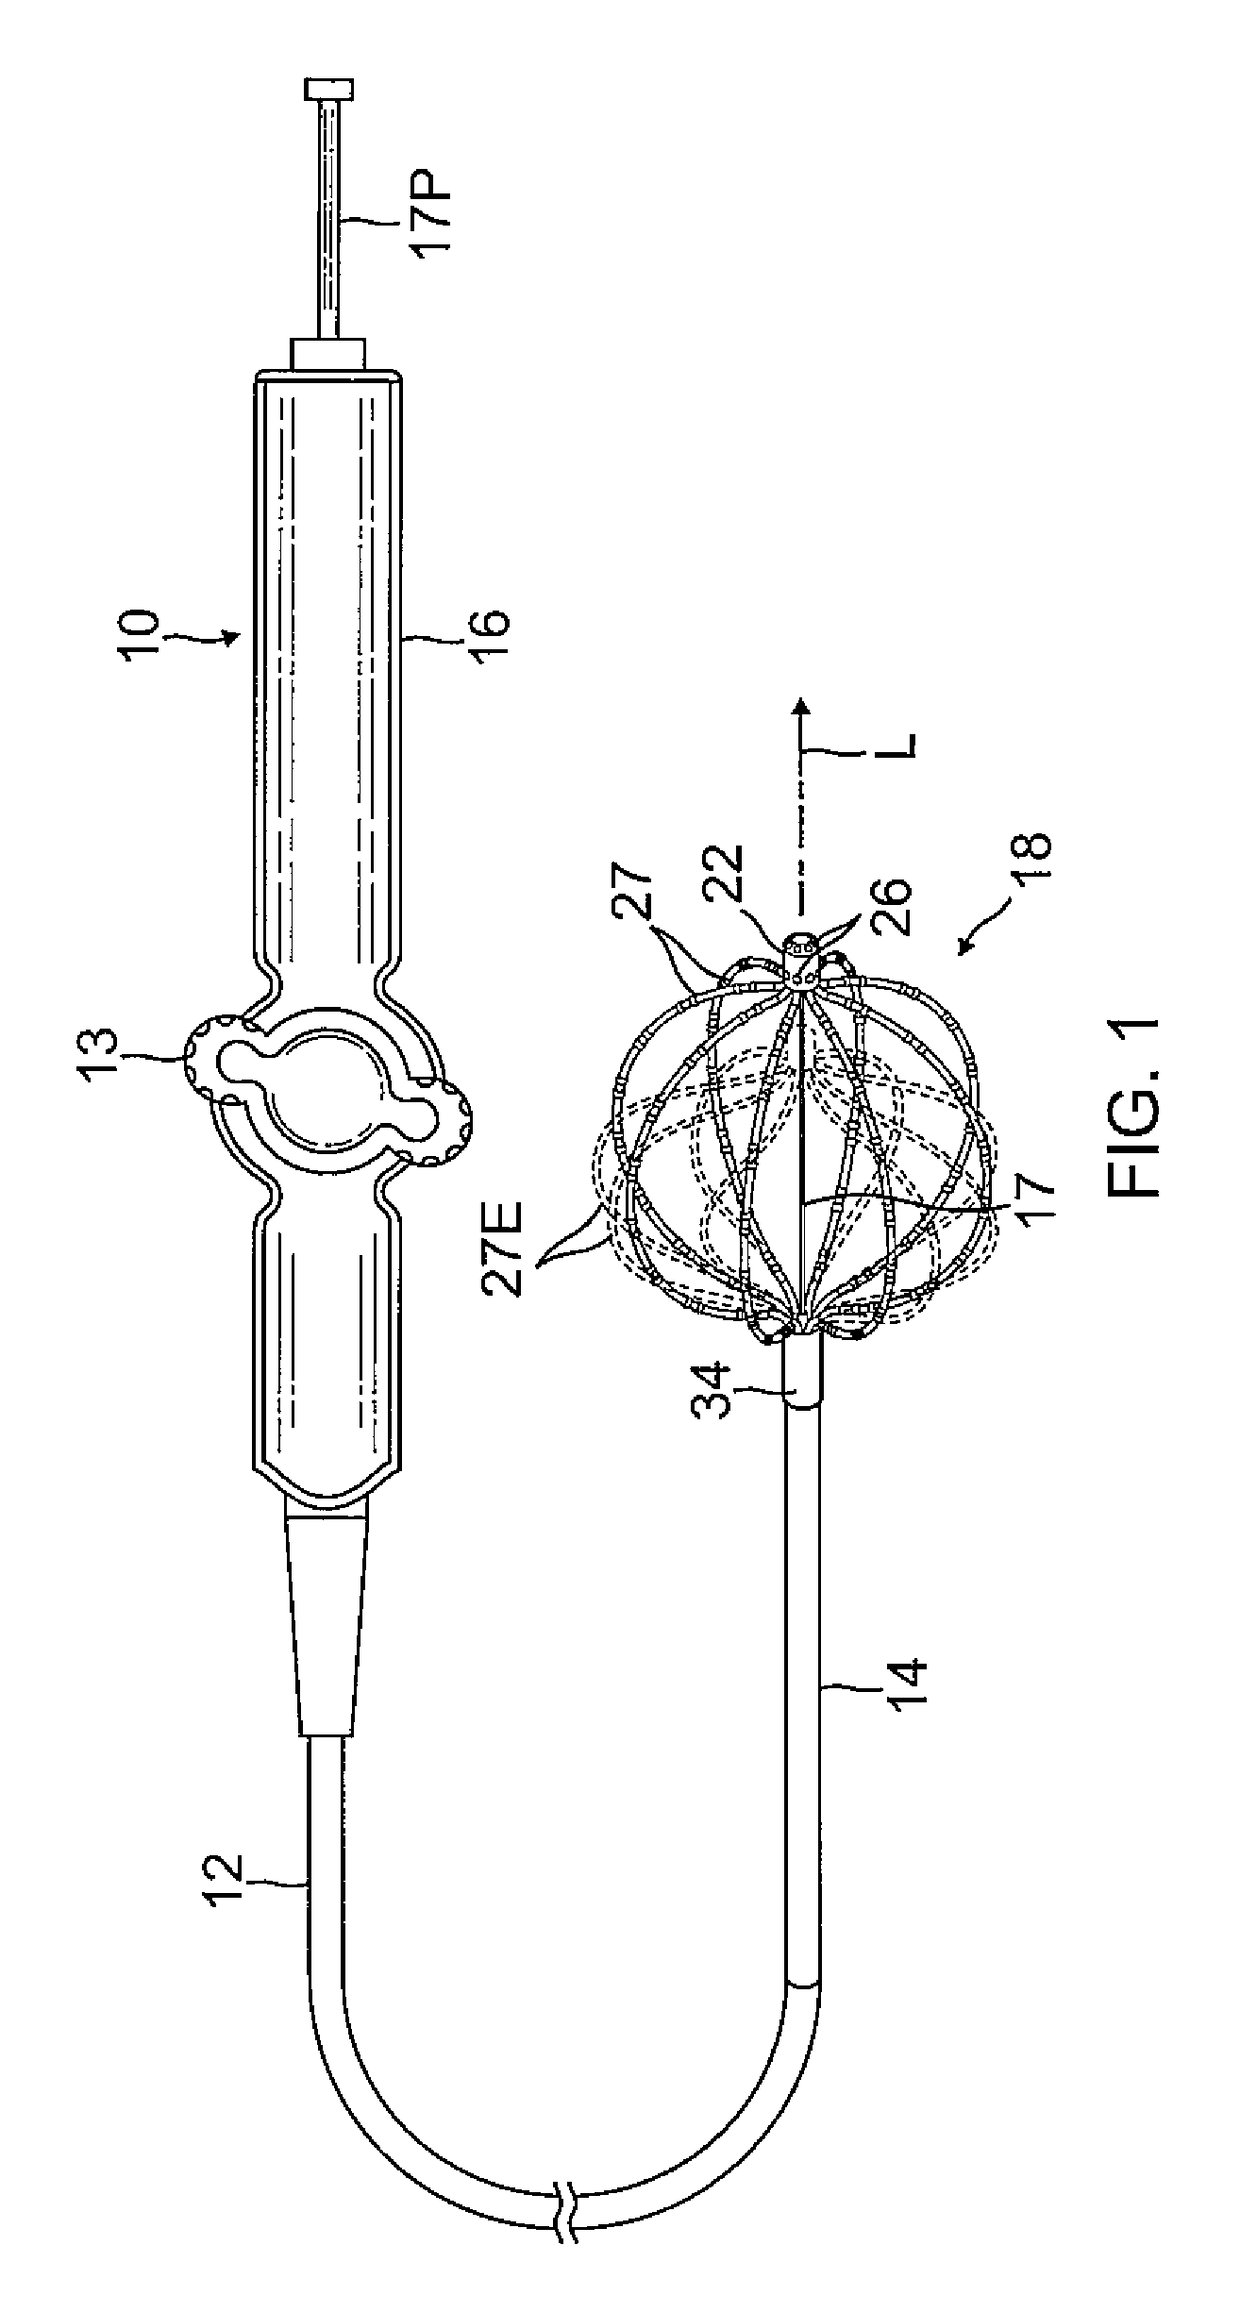 Basket catheter with improved spine flexibility